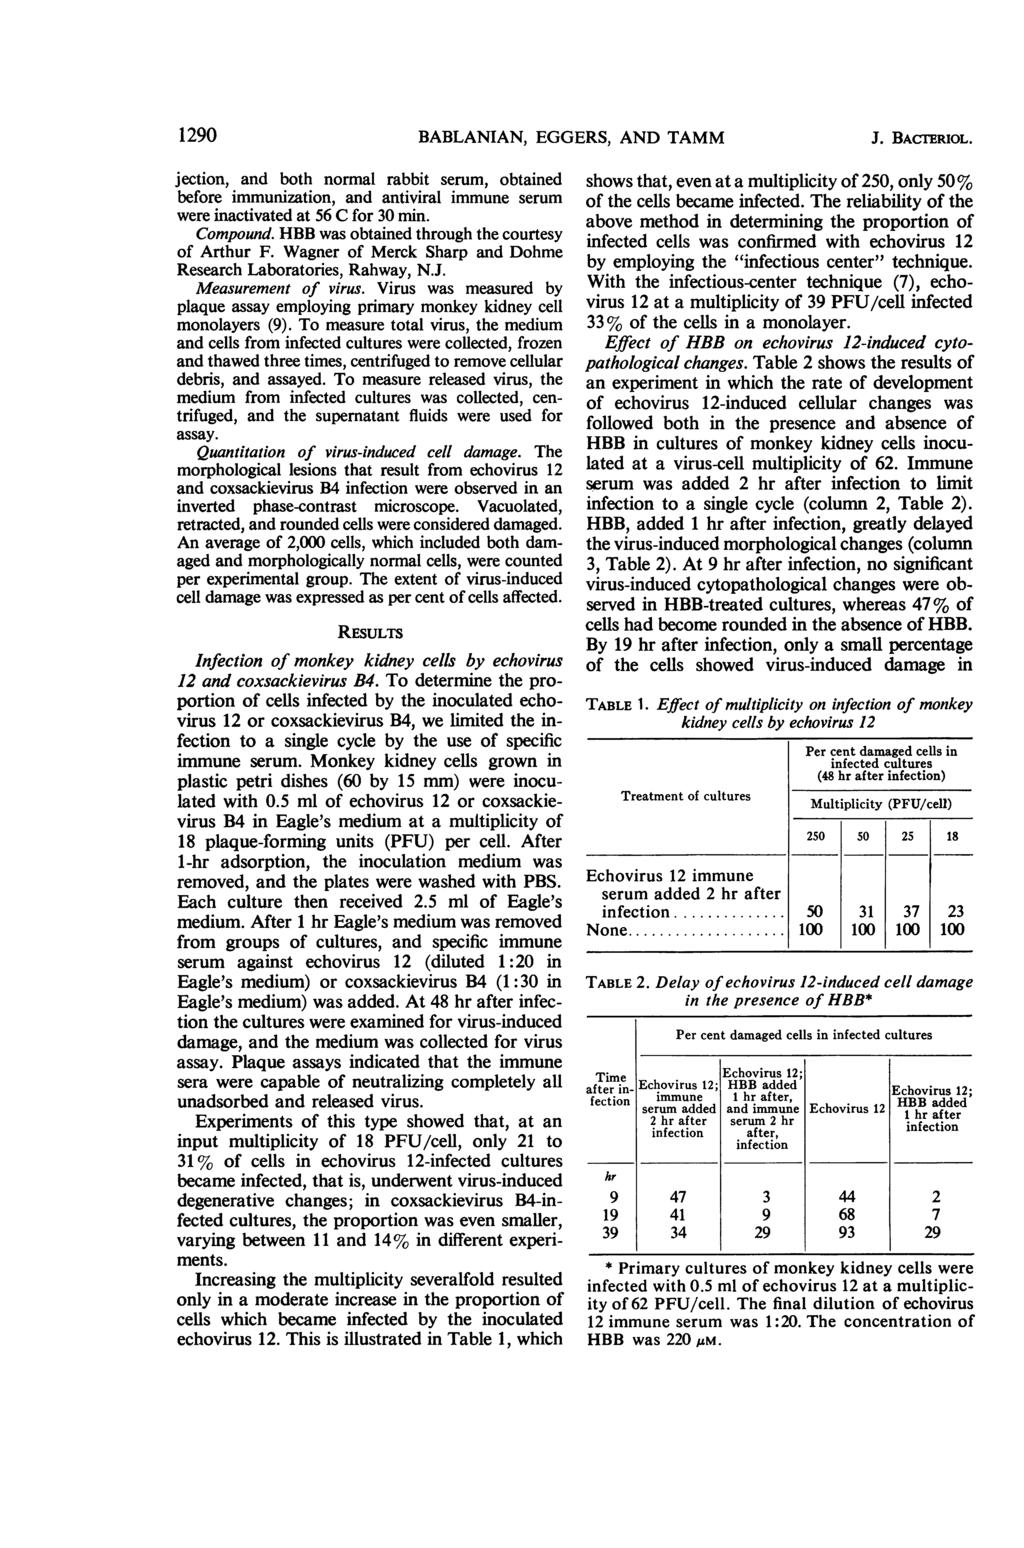 129 BABLANAN, GGRS, AND TAMM J. BACTROL. jection, and both normal rabbit serum, obtained before immunization, and antiviral immune serum were inactivated at 56 C for 3 min. Compound.